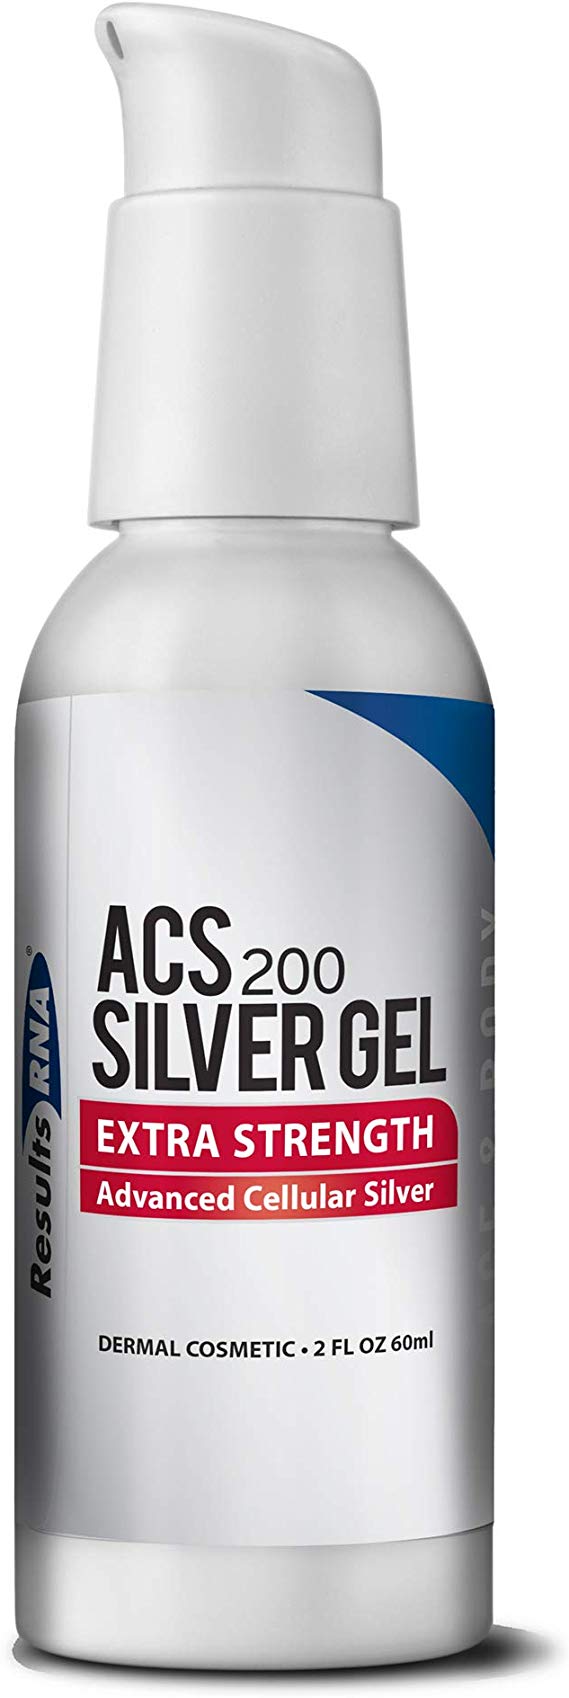 Results RNA ACS 200 Colloidal Silver Extra Strength | Advanced Cellular Silver Topical Gel For Sunburn, Wounds, Rashes, Skin Irritations - 2oz Silver Gel Bottle